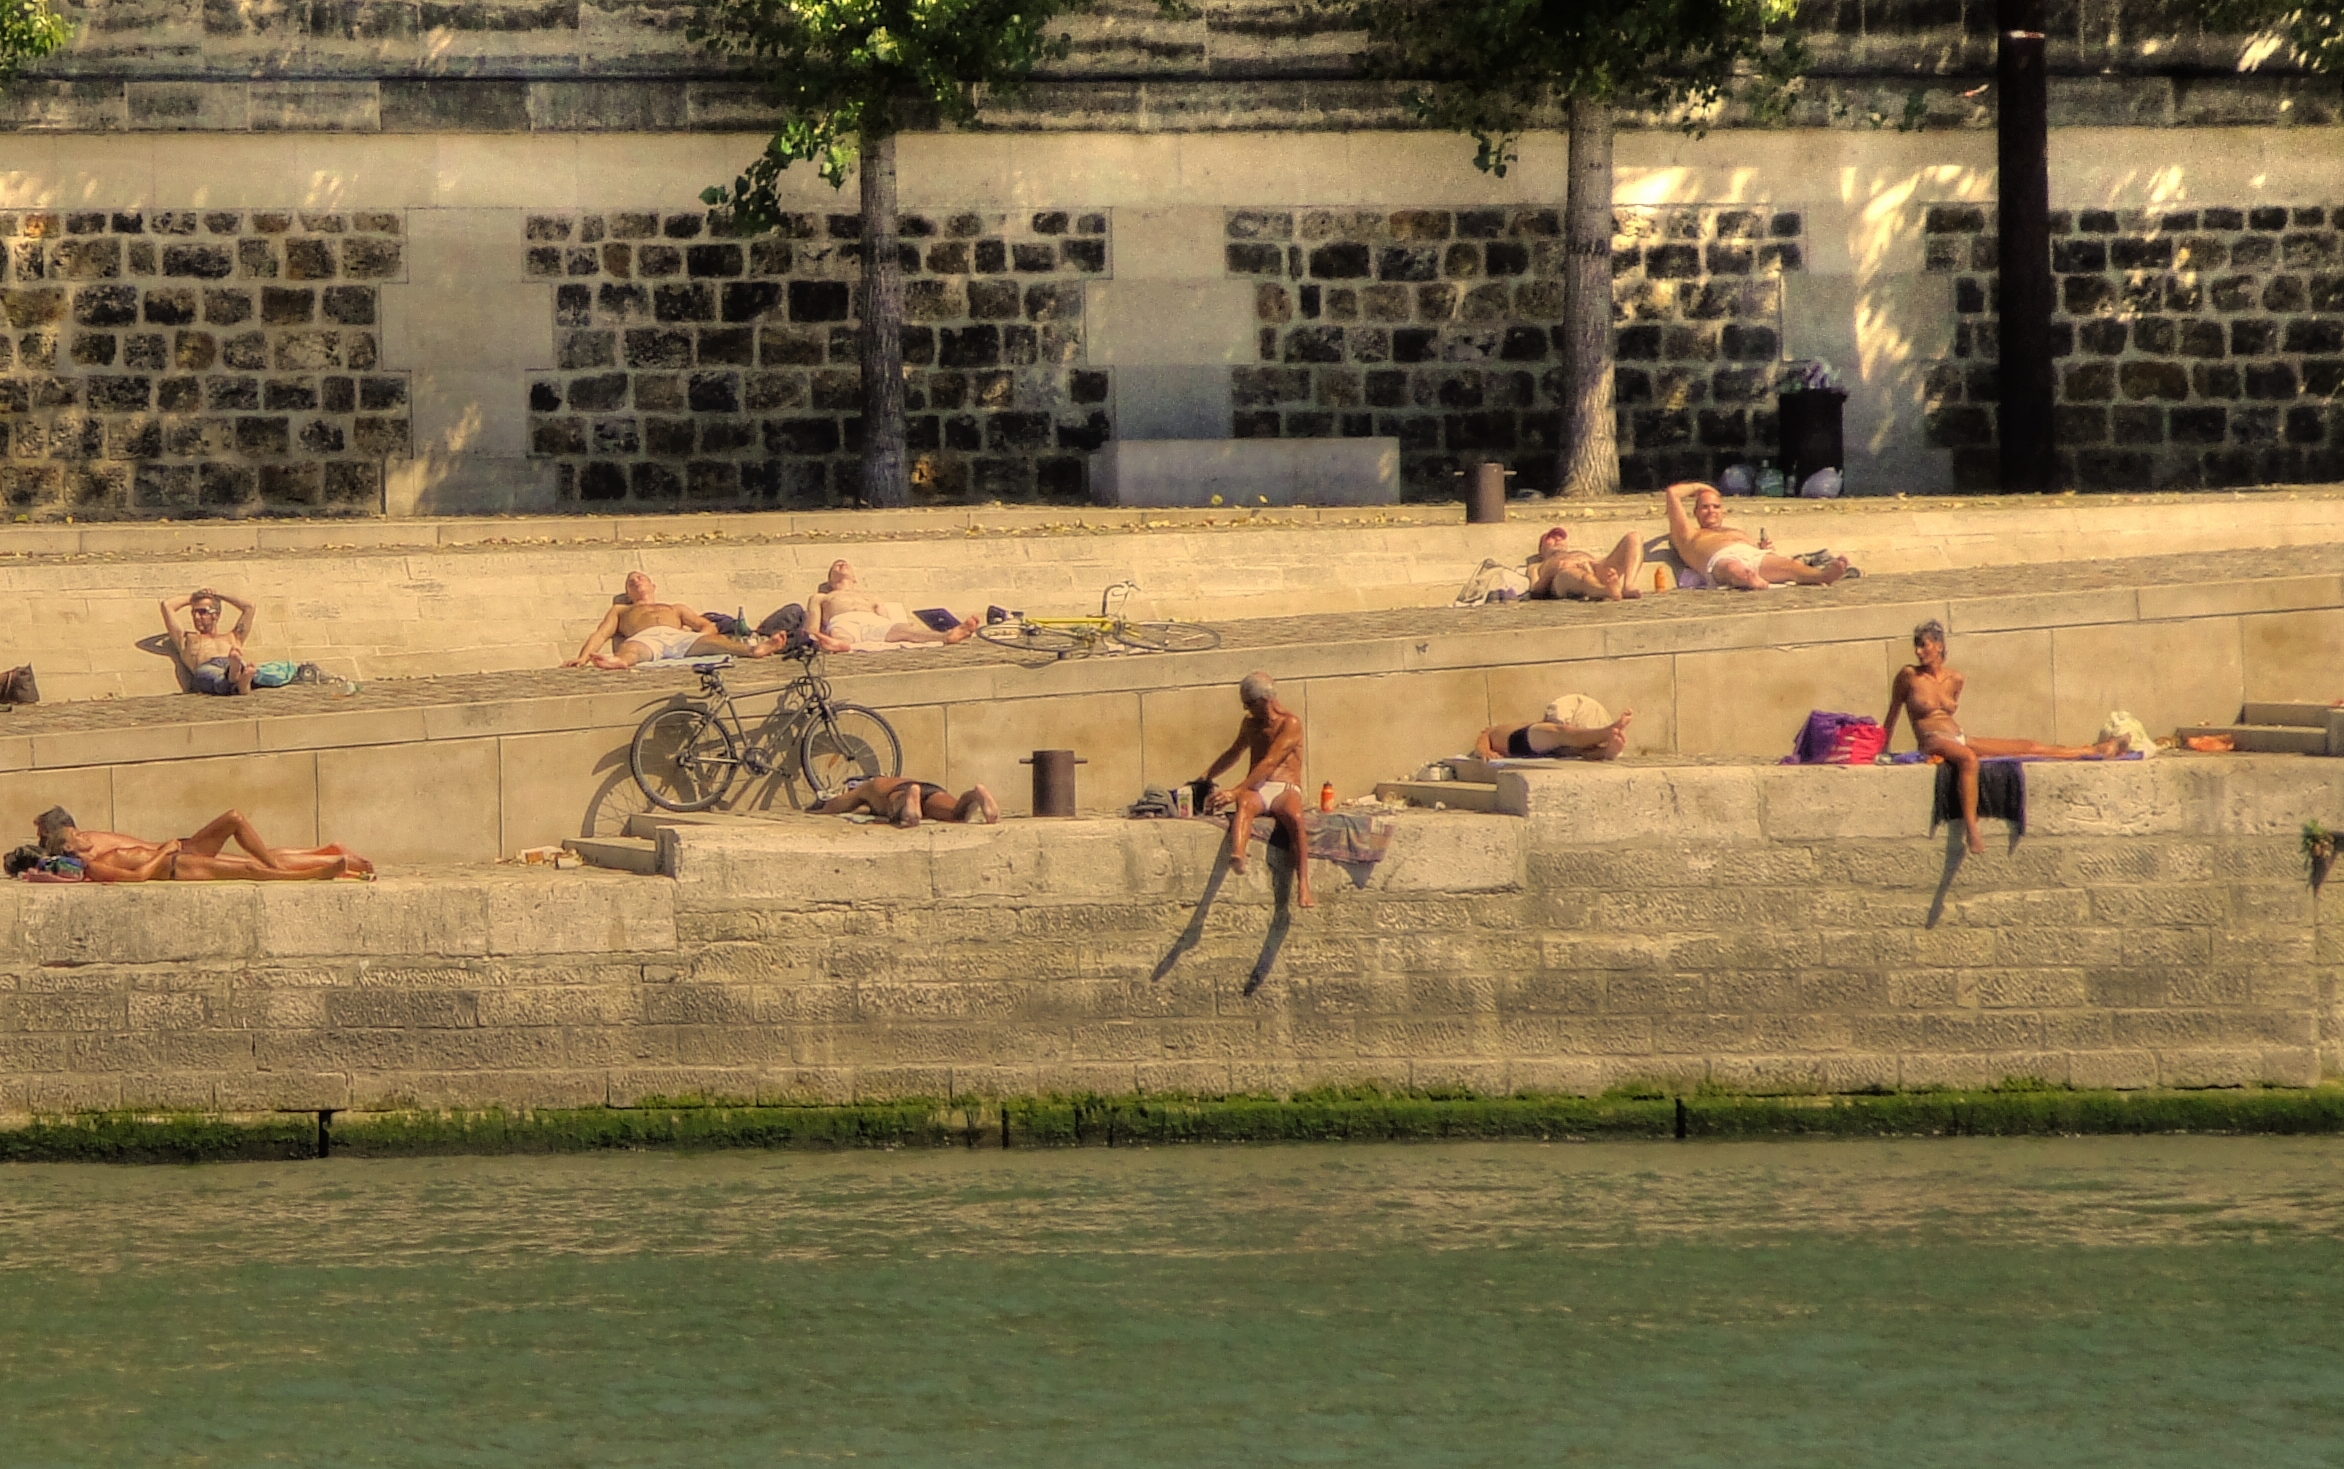 sunbathe on the banks of the Seine is priceless...